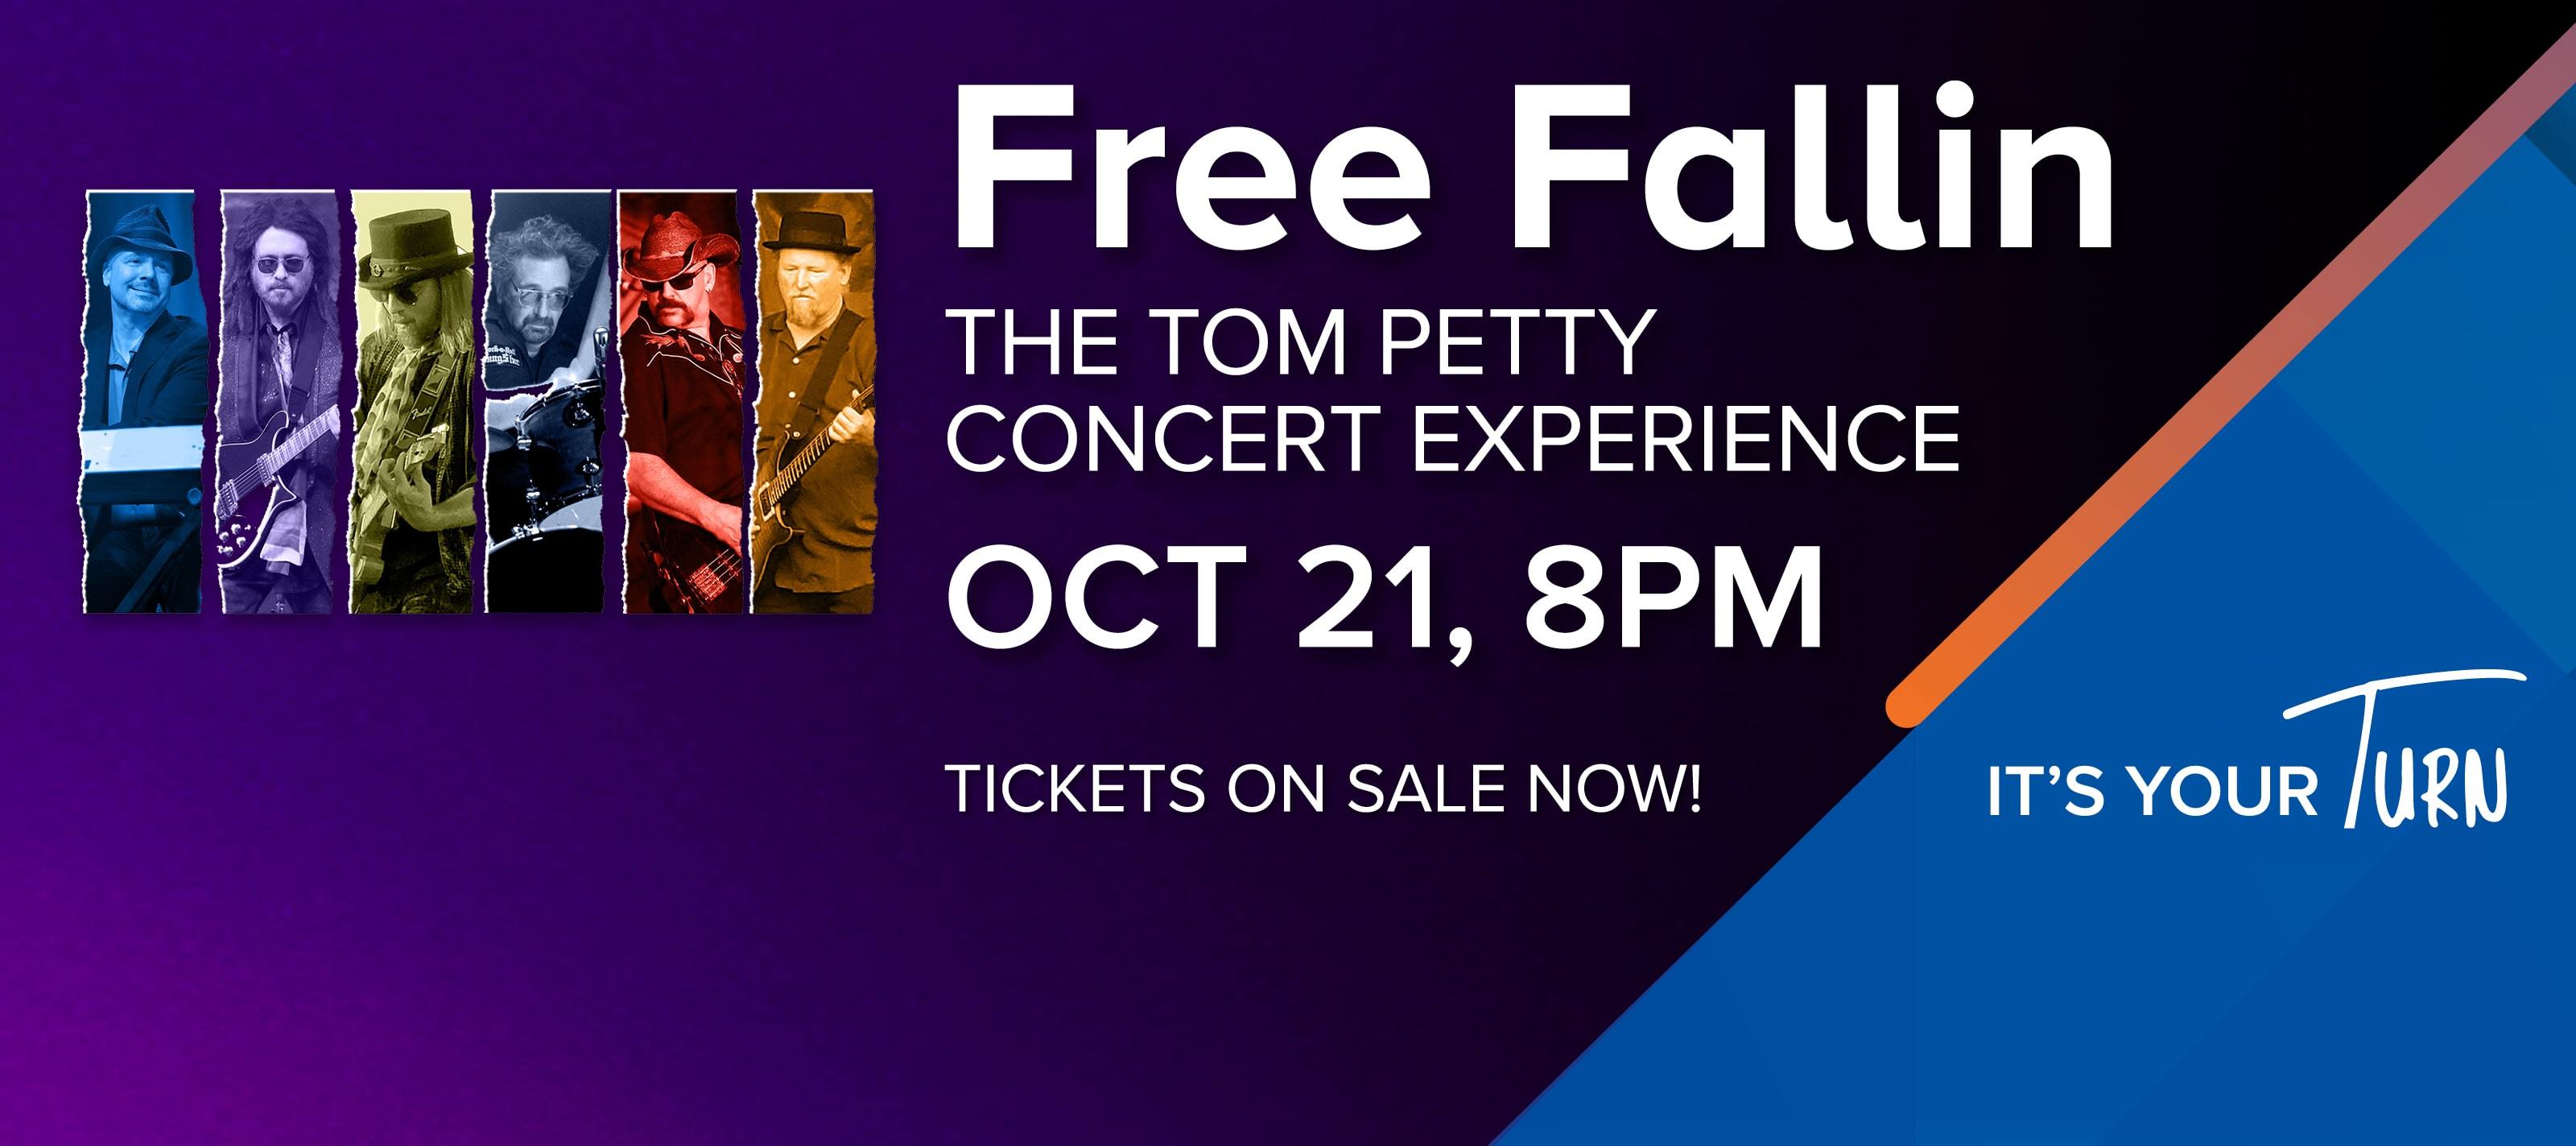 Free Fallin The Tom Petty Concert Experience Oct 21 8pm Tickets on sale now